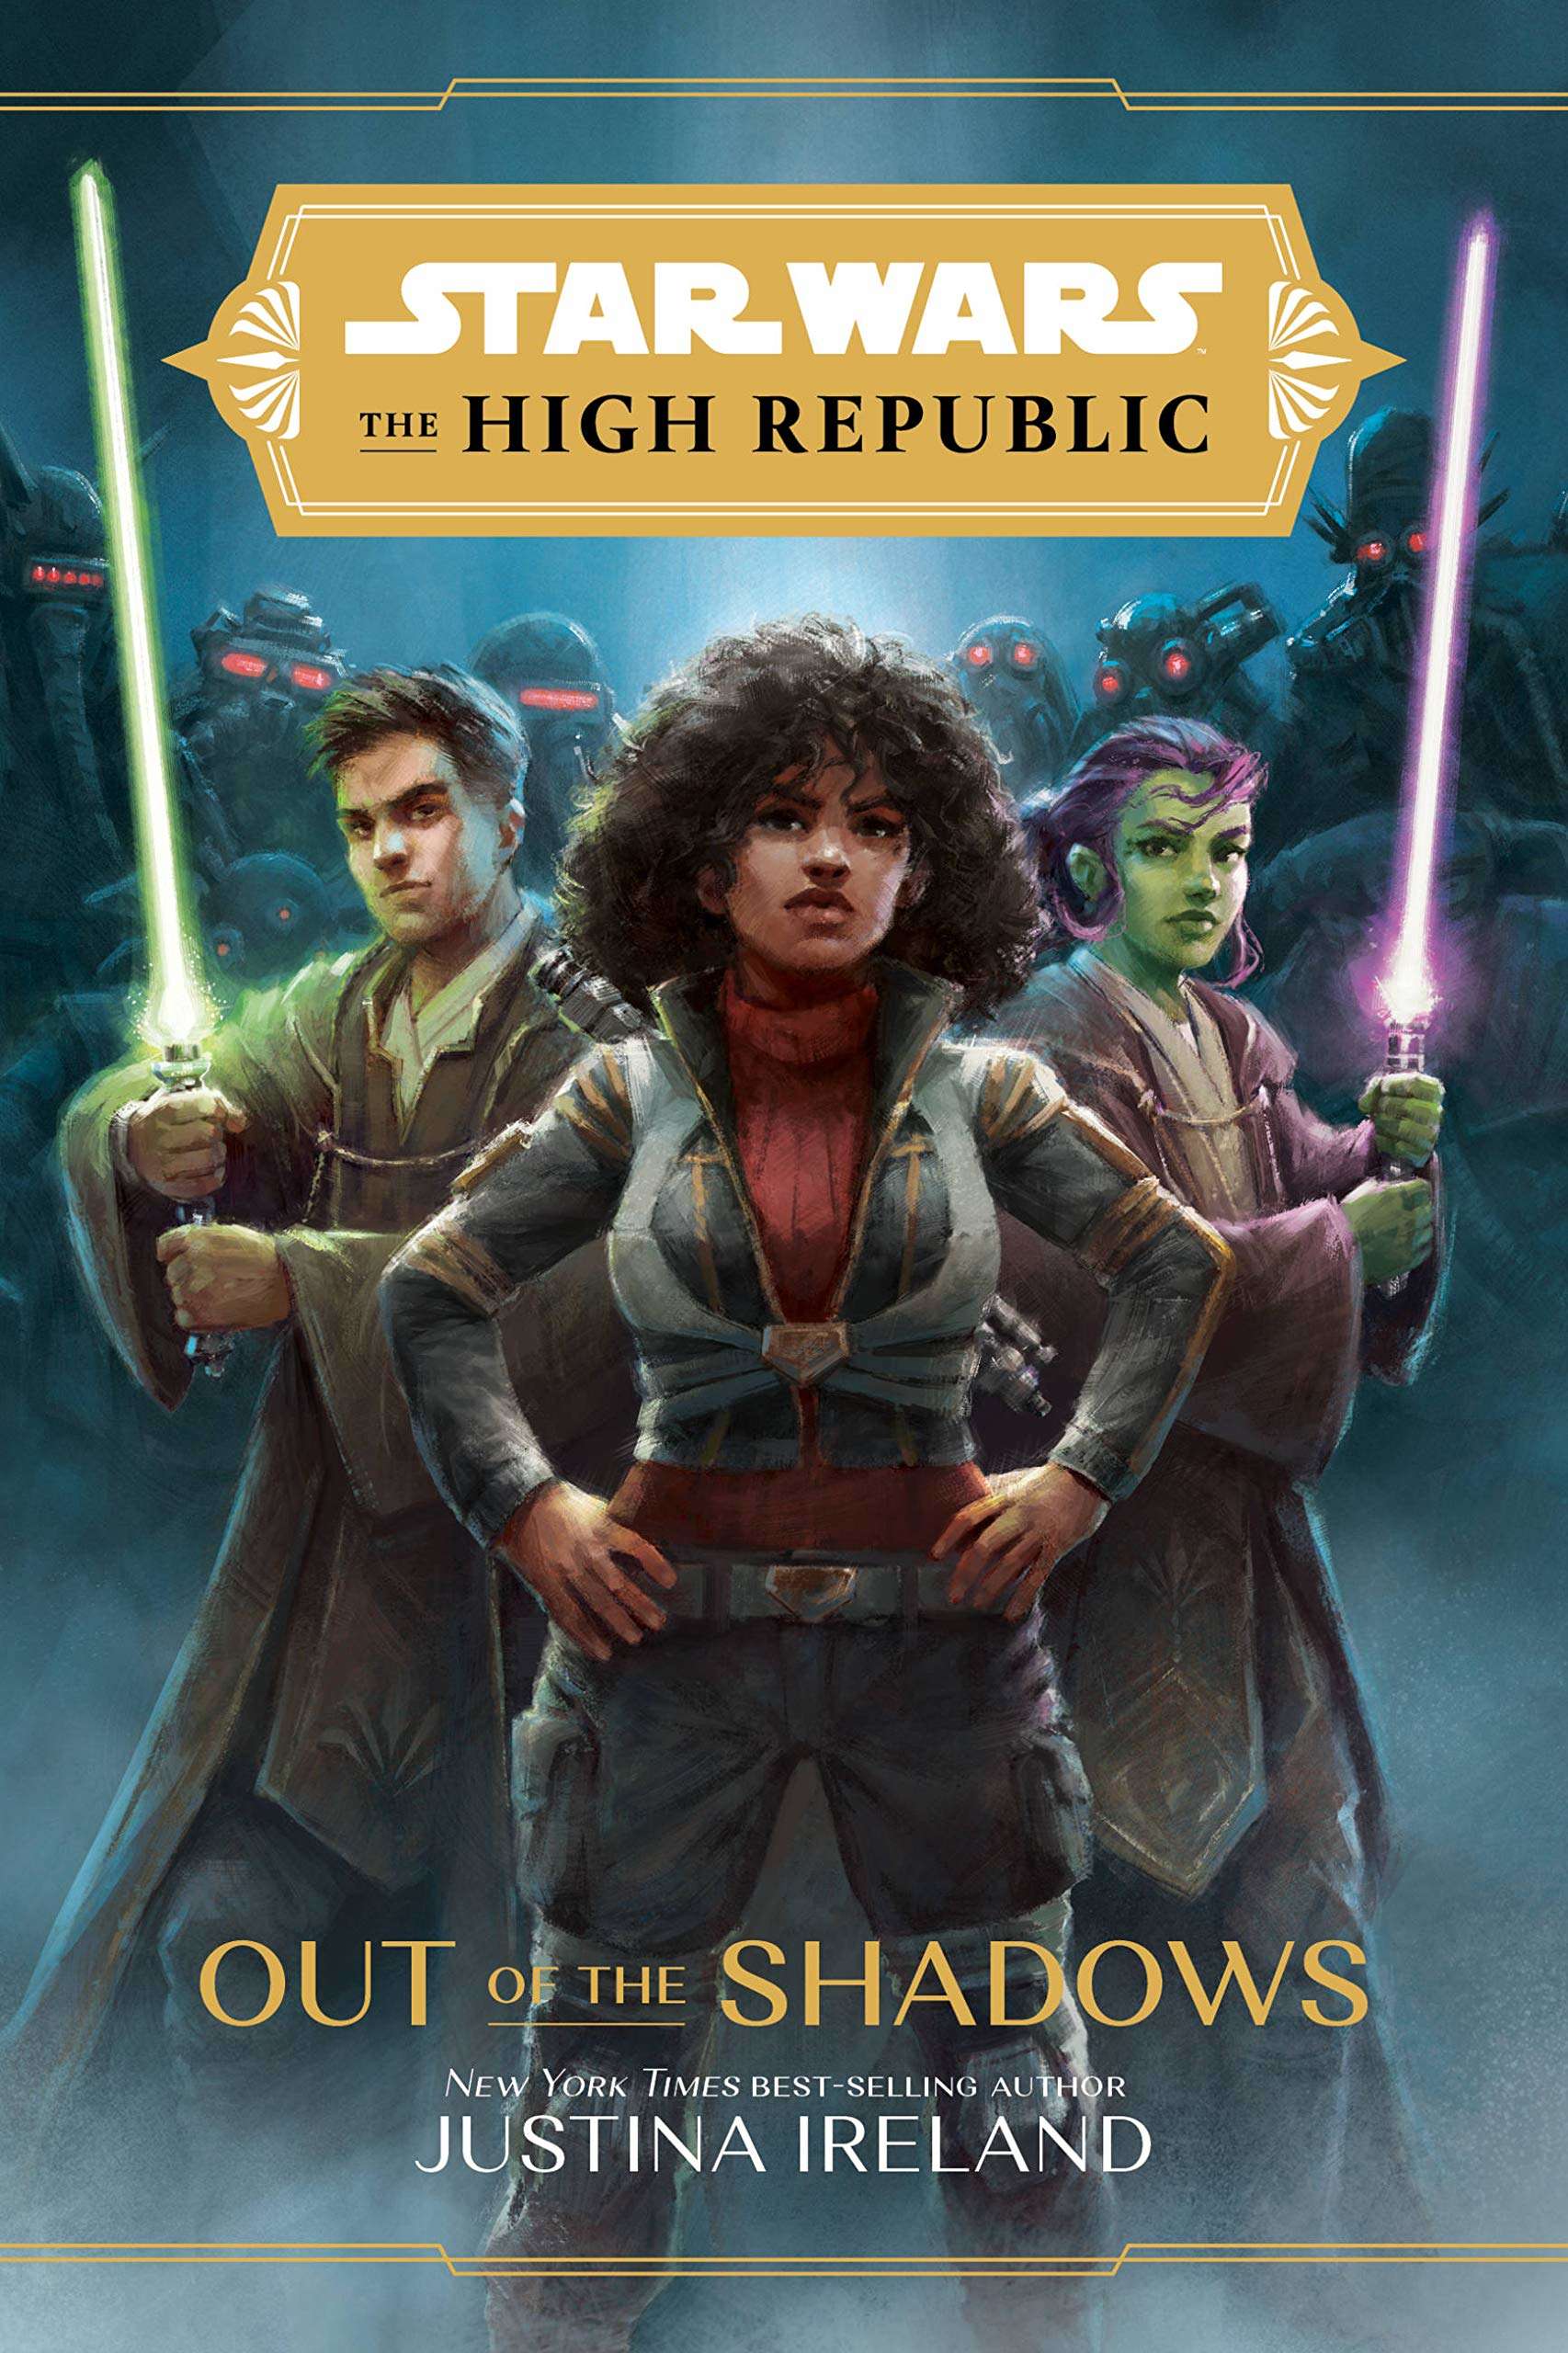 Star Wars The High Republic Out of the Shadows